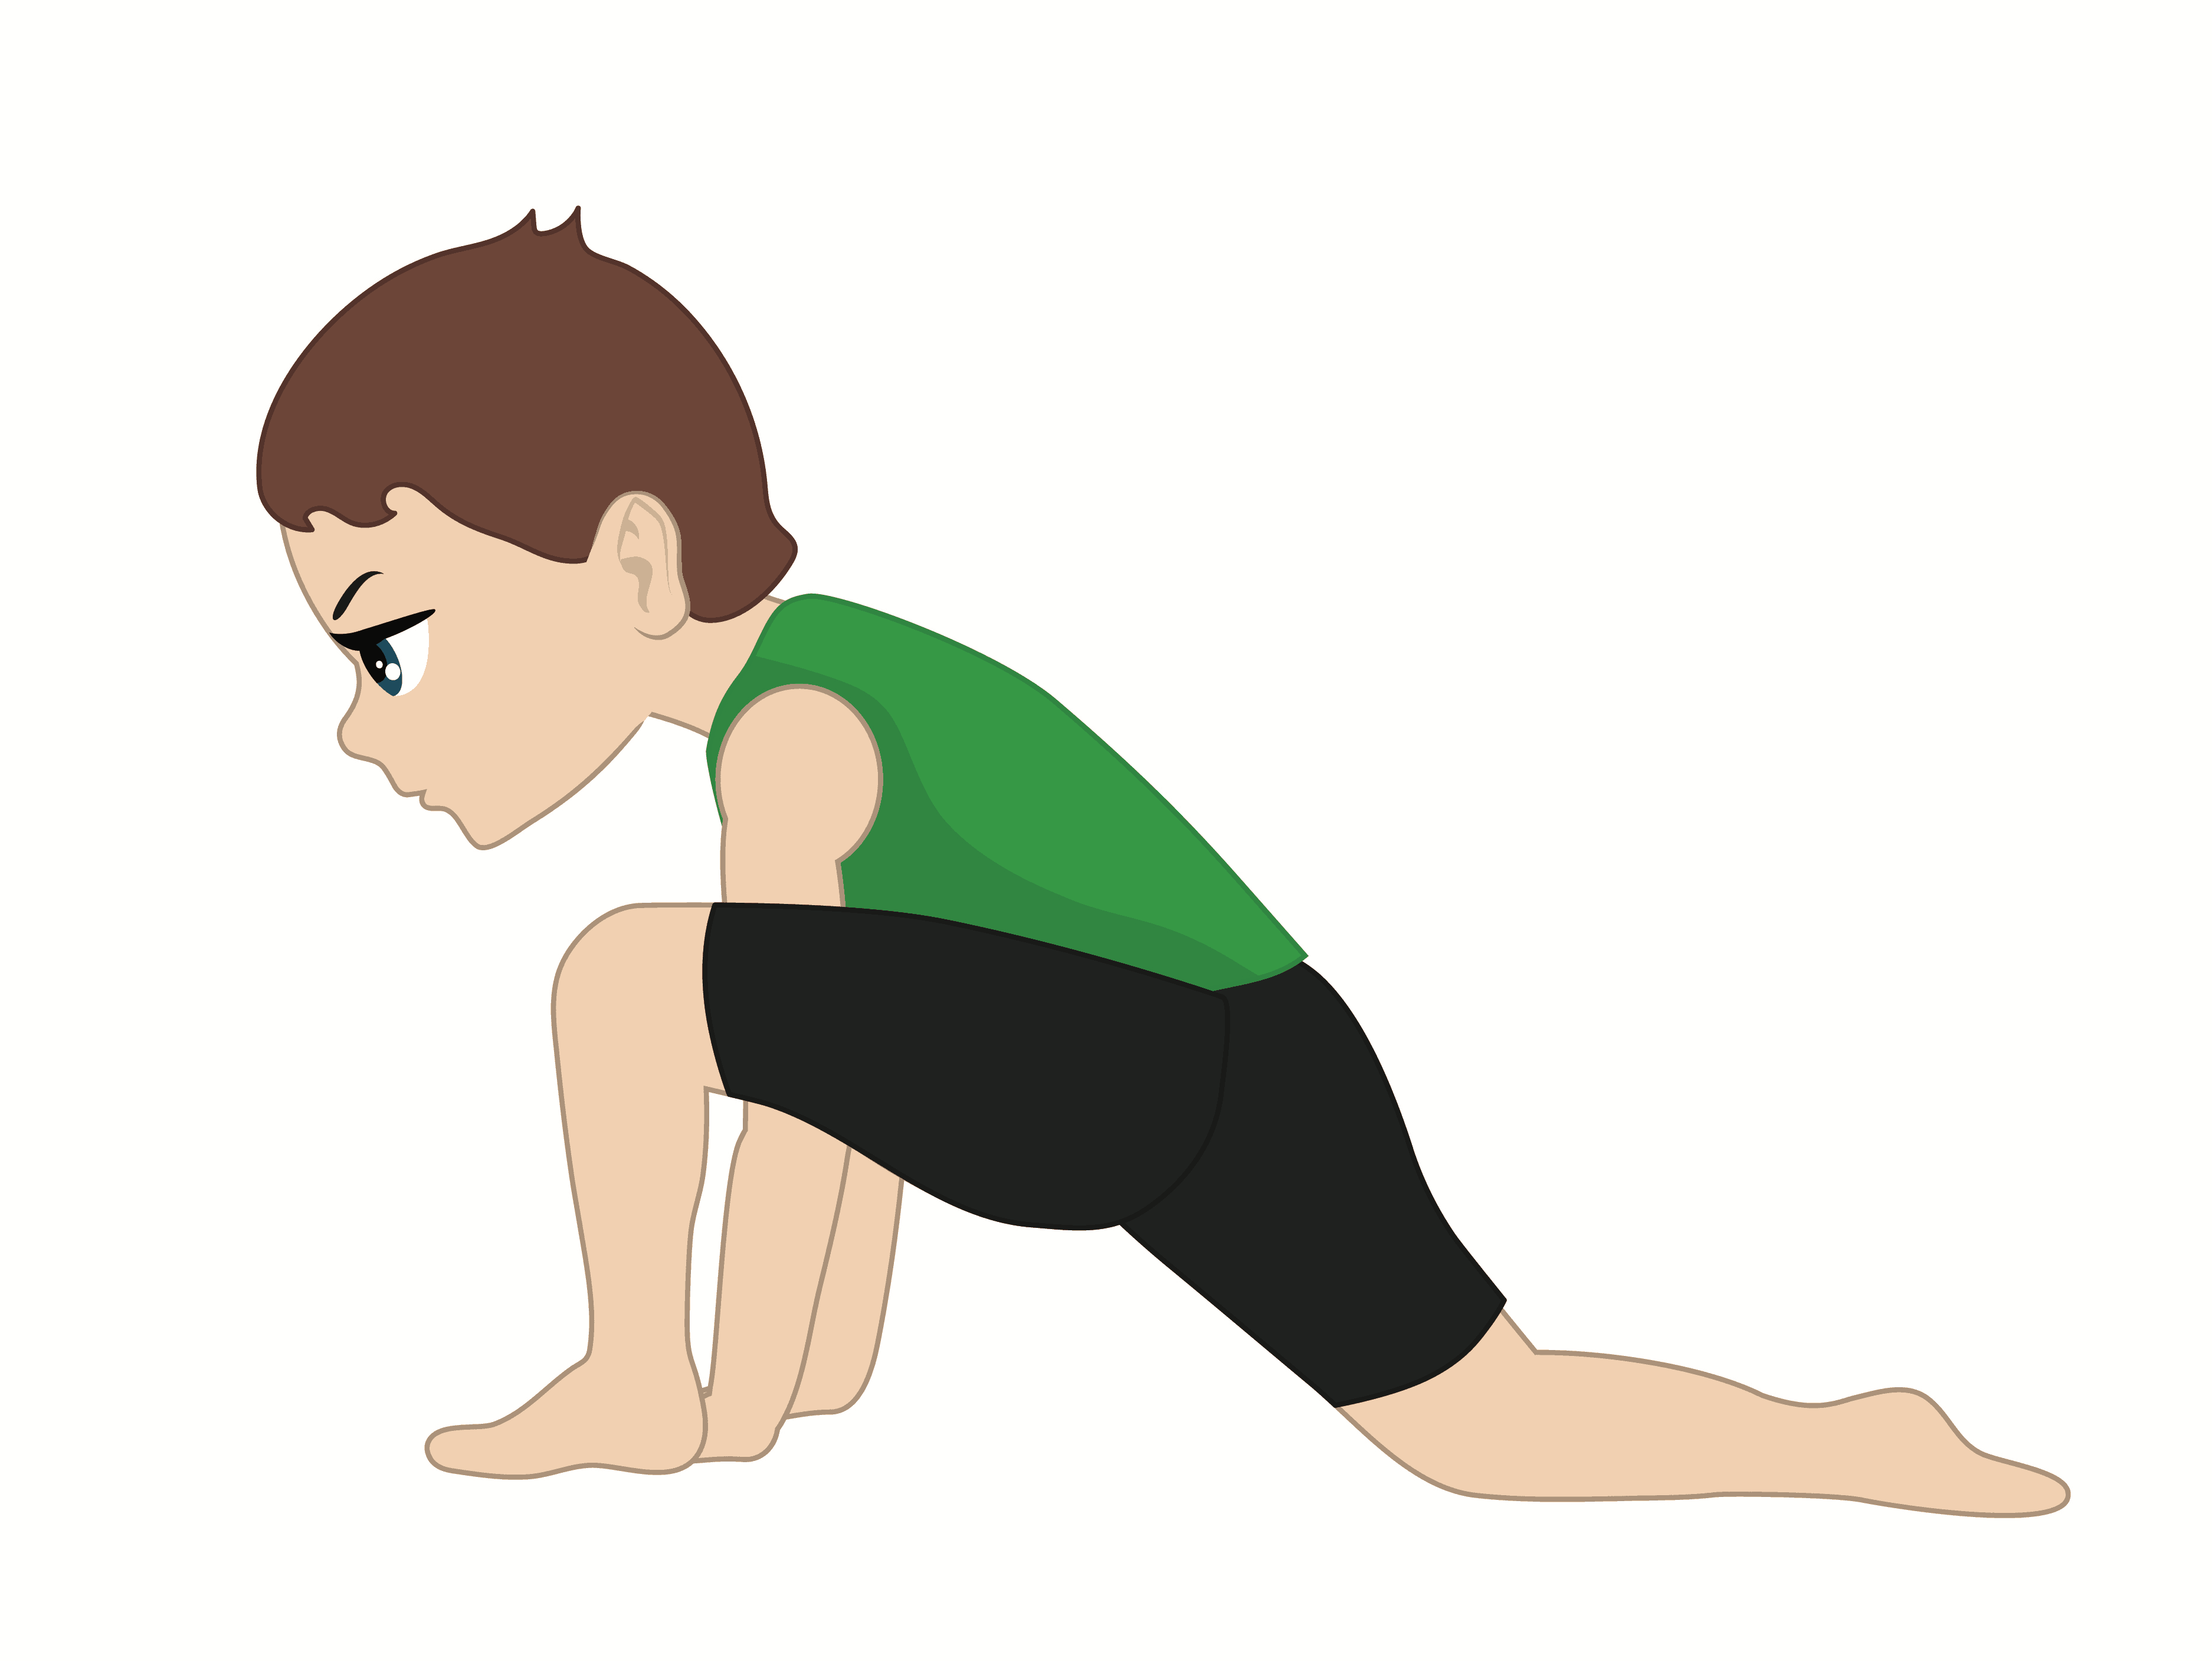 child doing low lunge pose with one knee on the ground and hands on the ground by the other foot to stretch hips